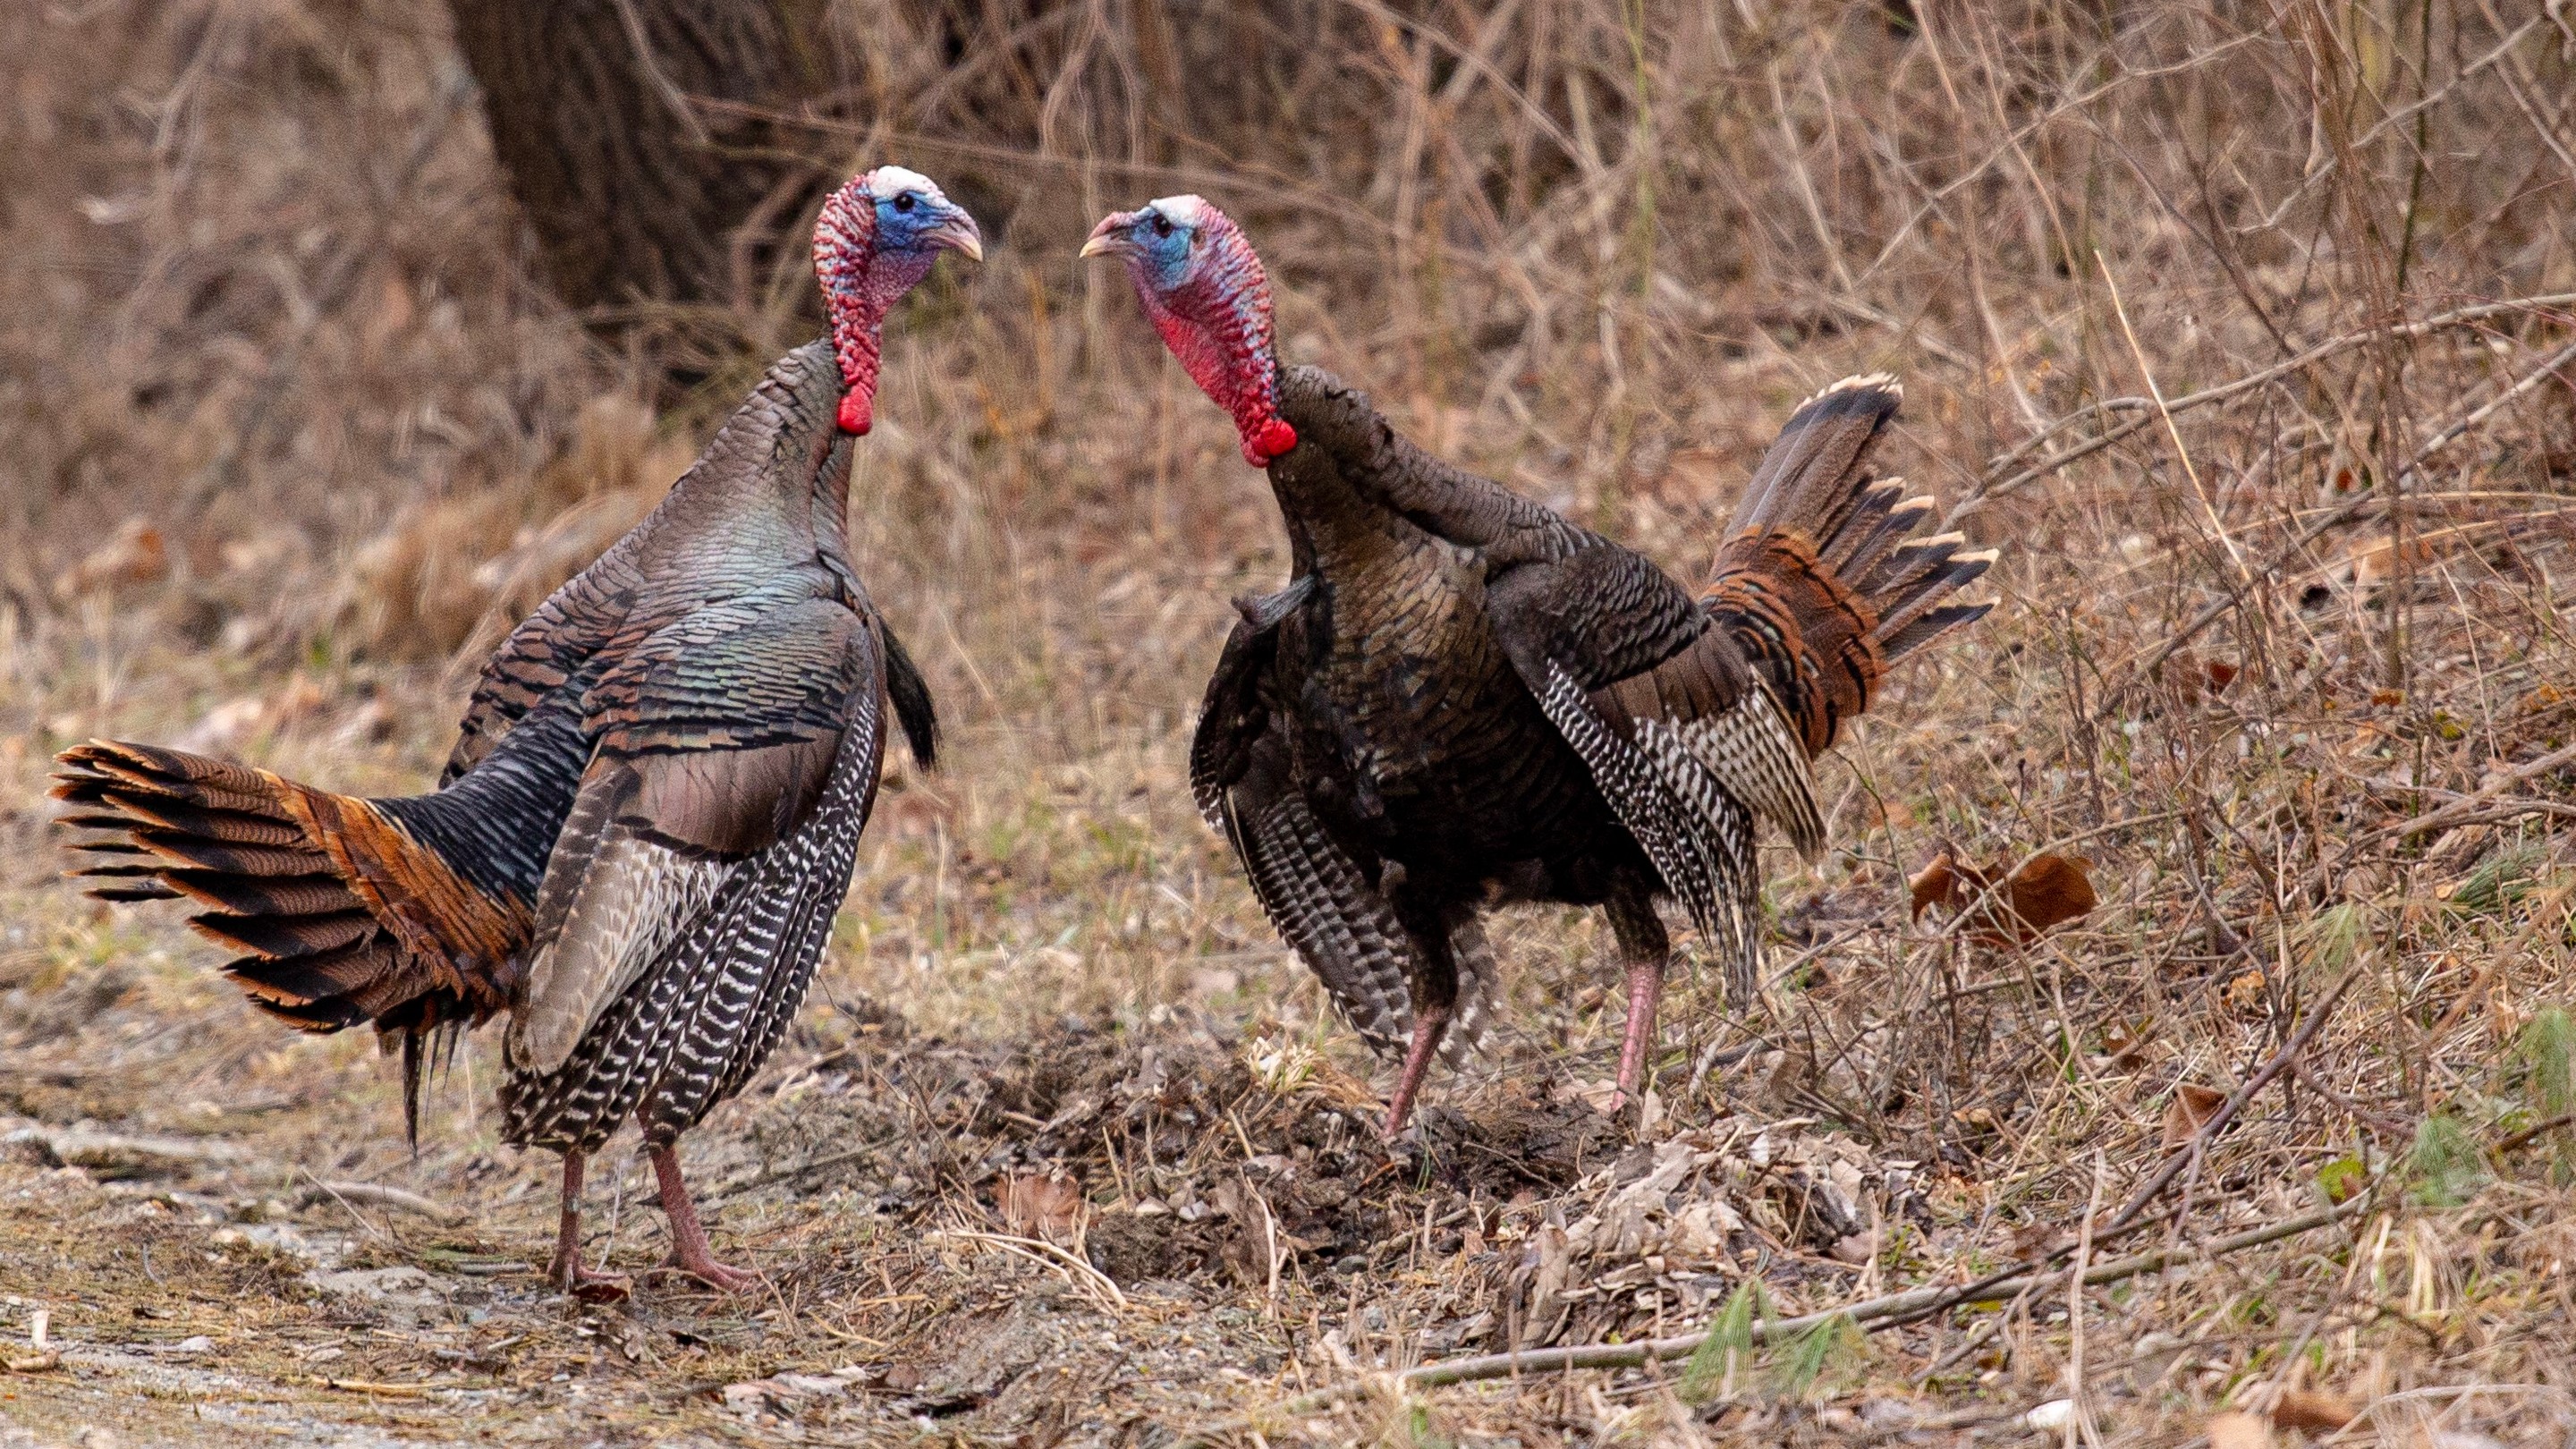 Two tom turkeys size each other up at a brushy forest edge.